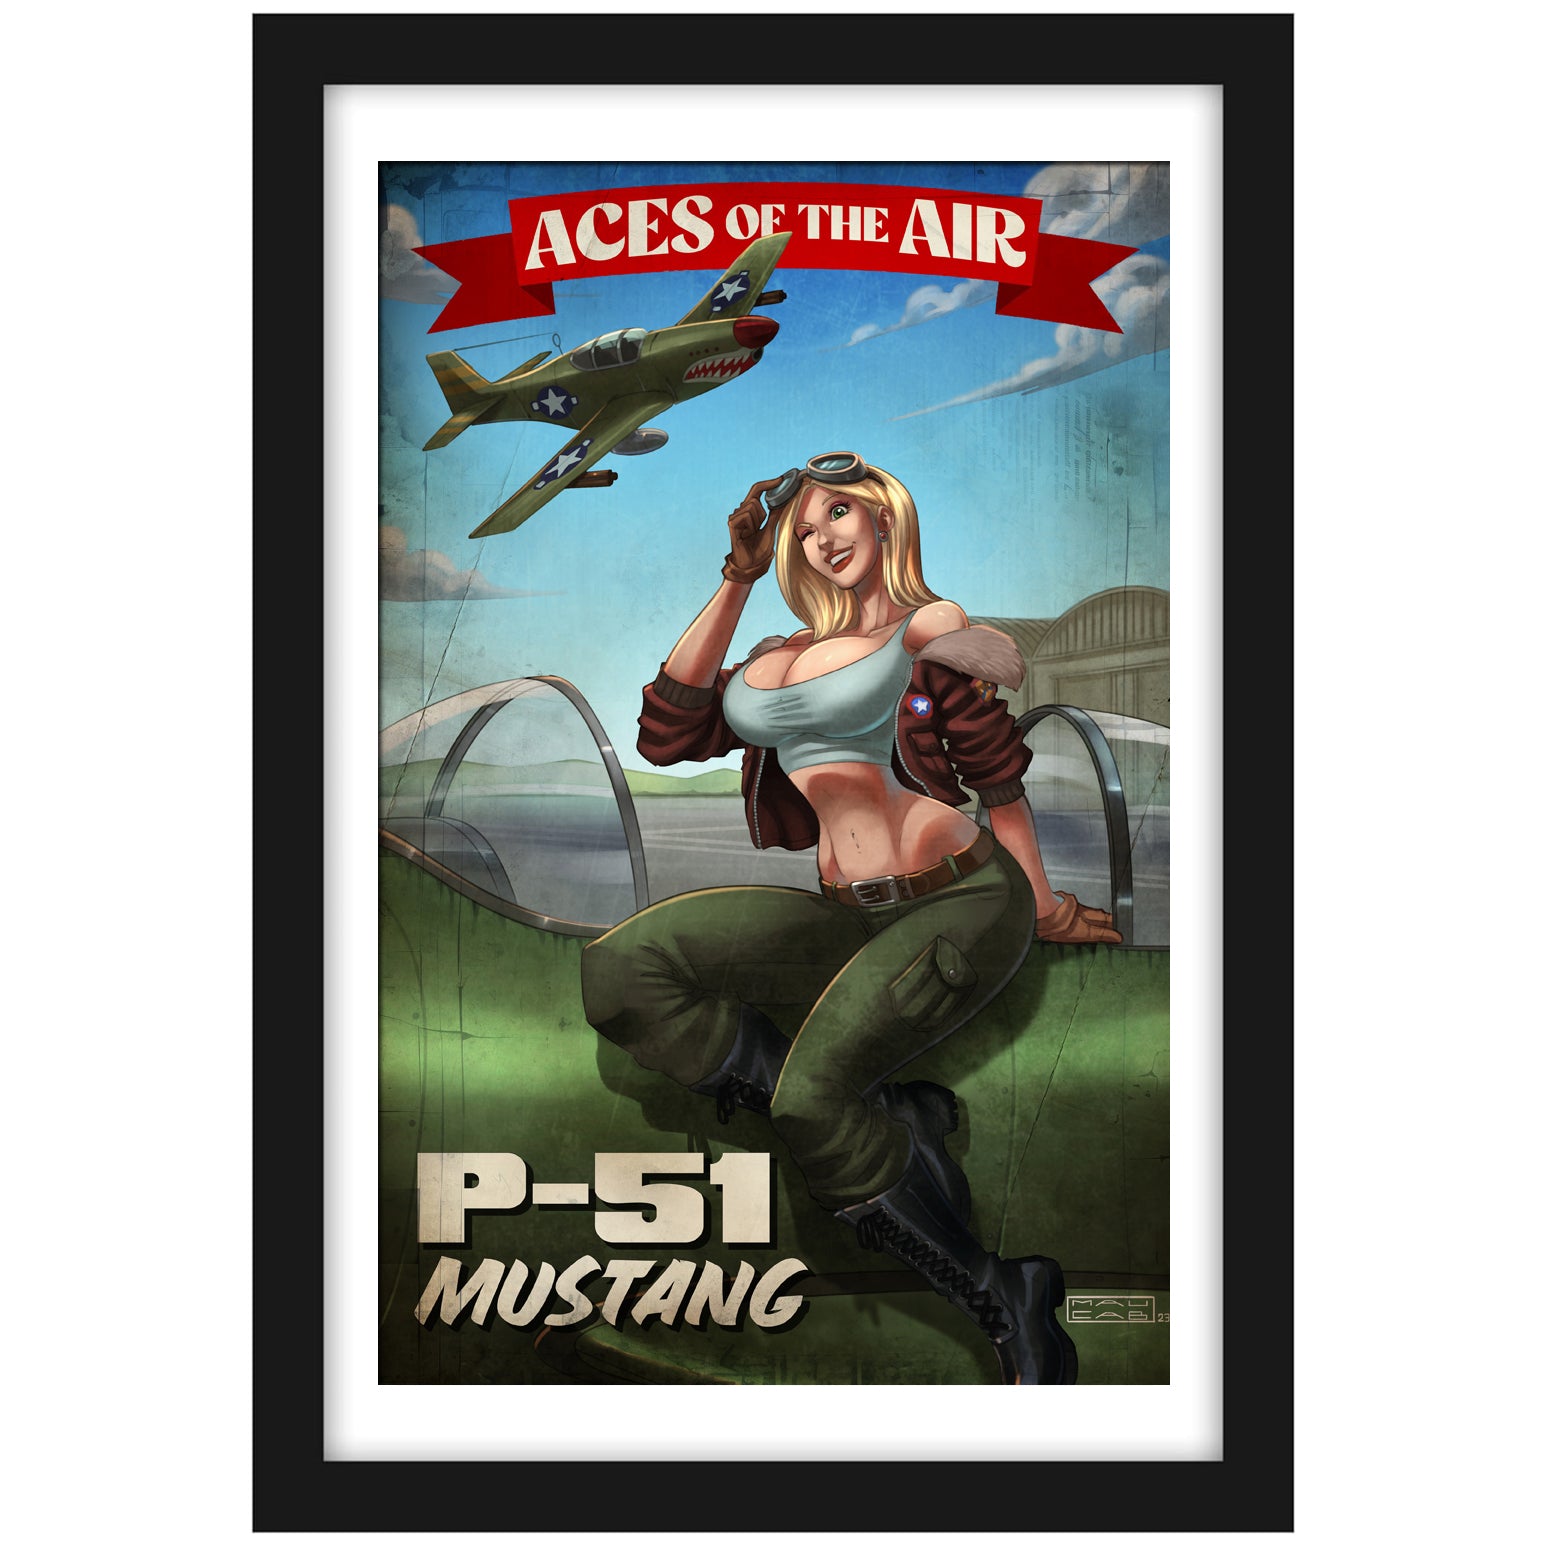 P-51 Mustang "Aces of the Air" - Vintage Print Pinup & Airplane Art by Mauricio Caballero - Limited Numbered Edition